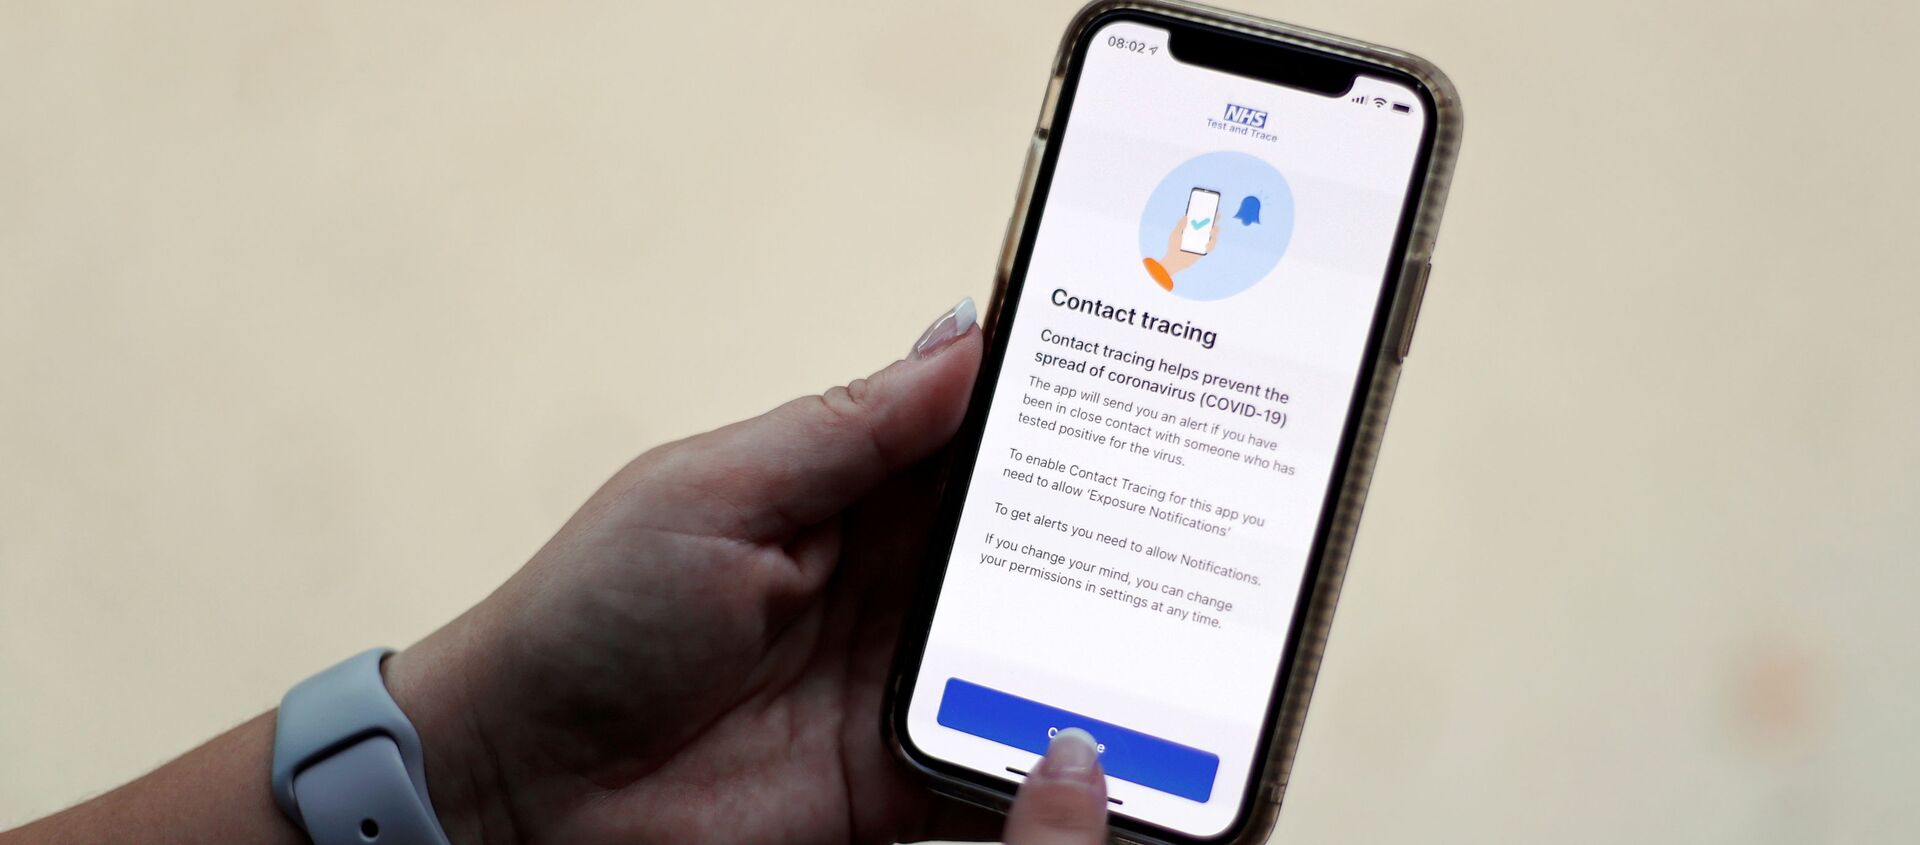 FILE PHOTO: The coronavirus disease (COVID-19) contact tracing smartphone app of Britain's National Health Service (NHS) is displayed on an iPhone in this illustration photograph taken in Keele, Britain, September 24, 2020.  - Sputnik International, 1920